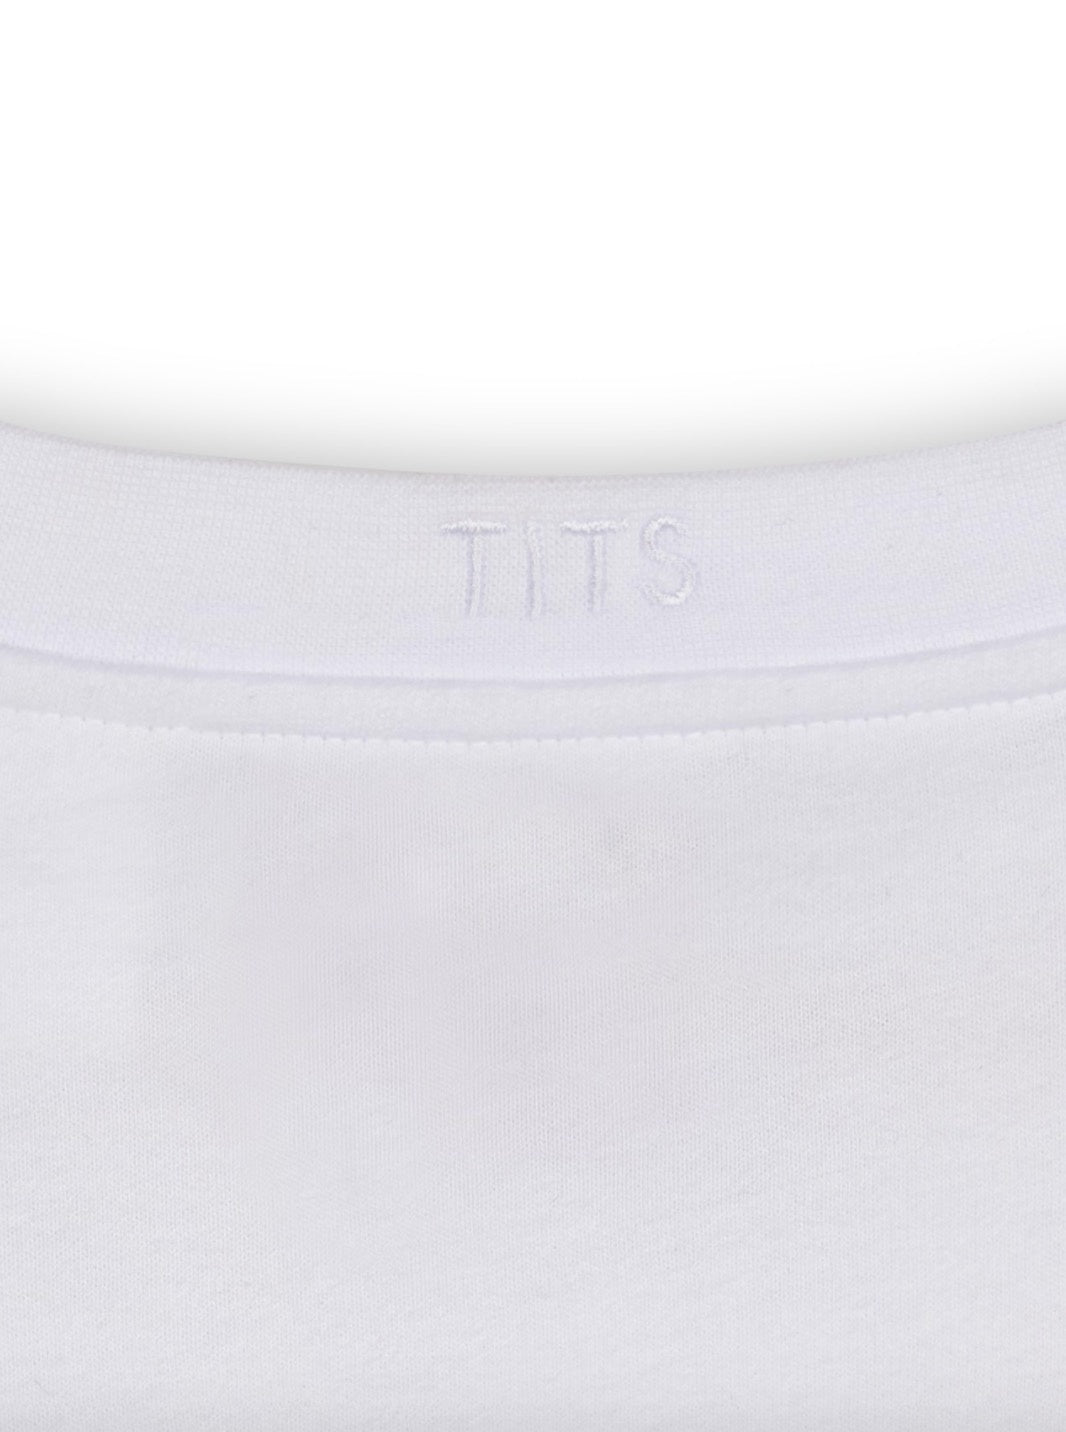 Tits Shirt in White/Black by T.I.T.S.